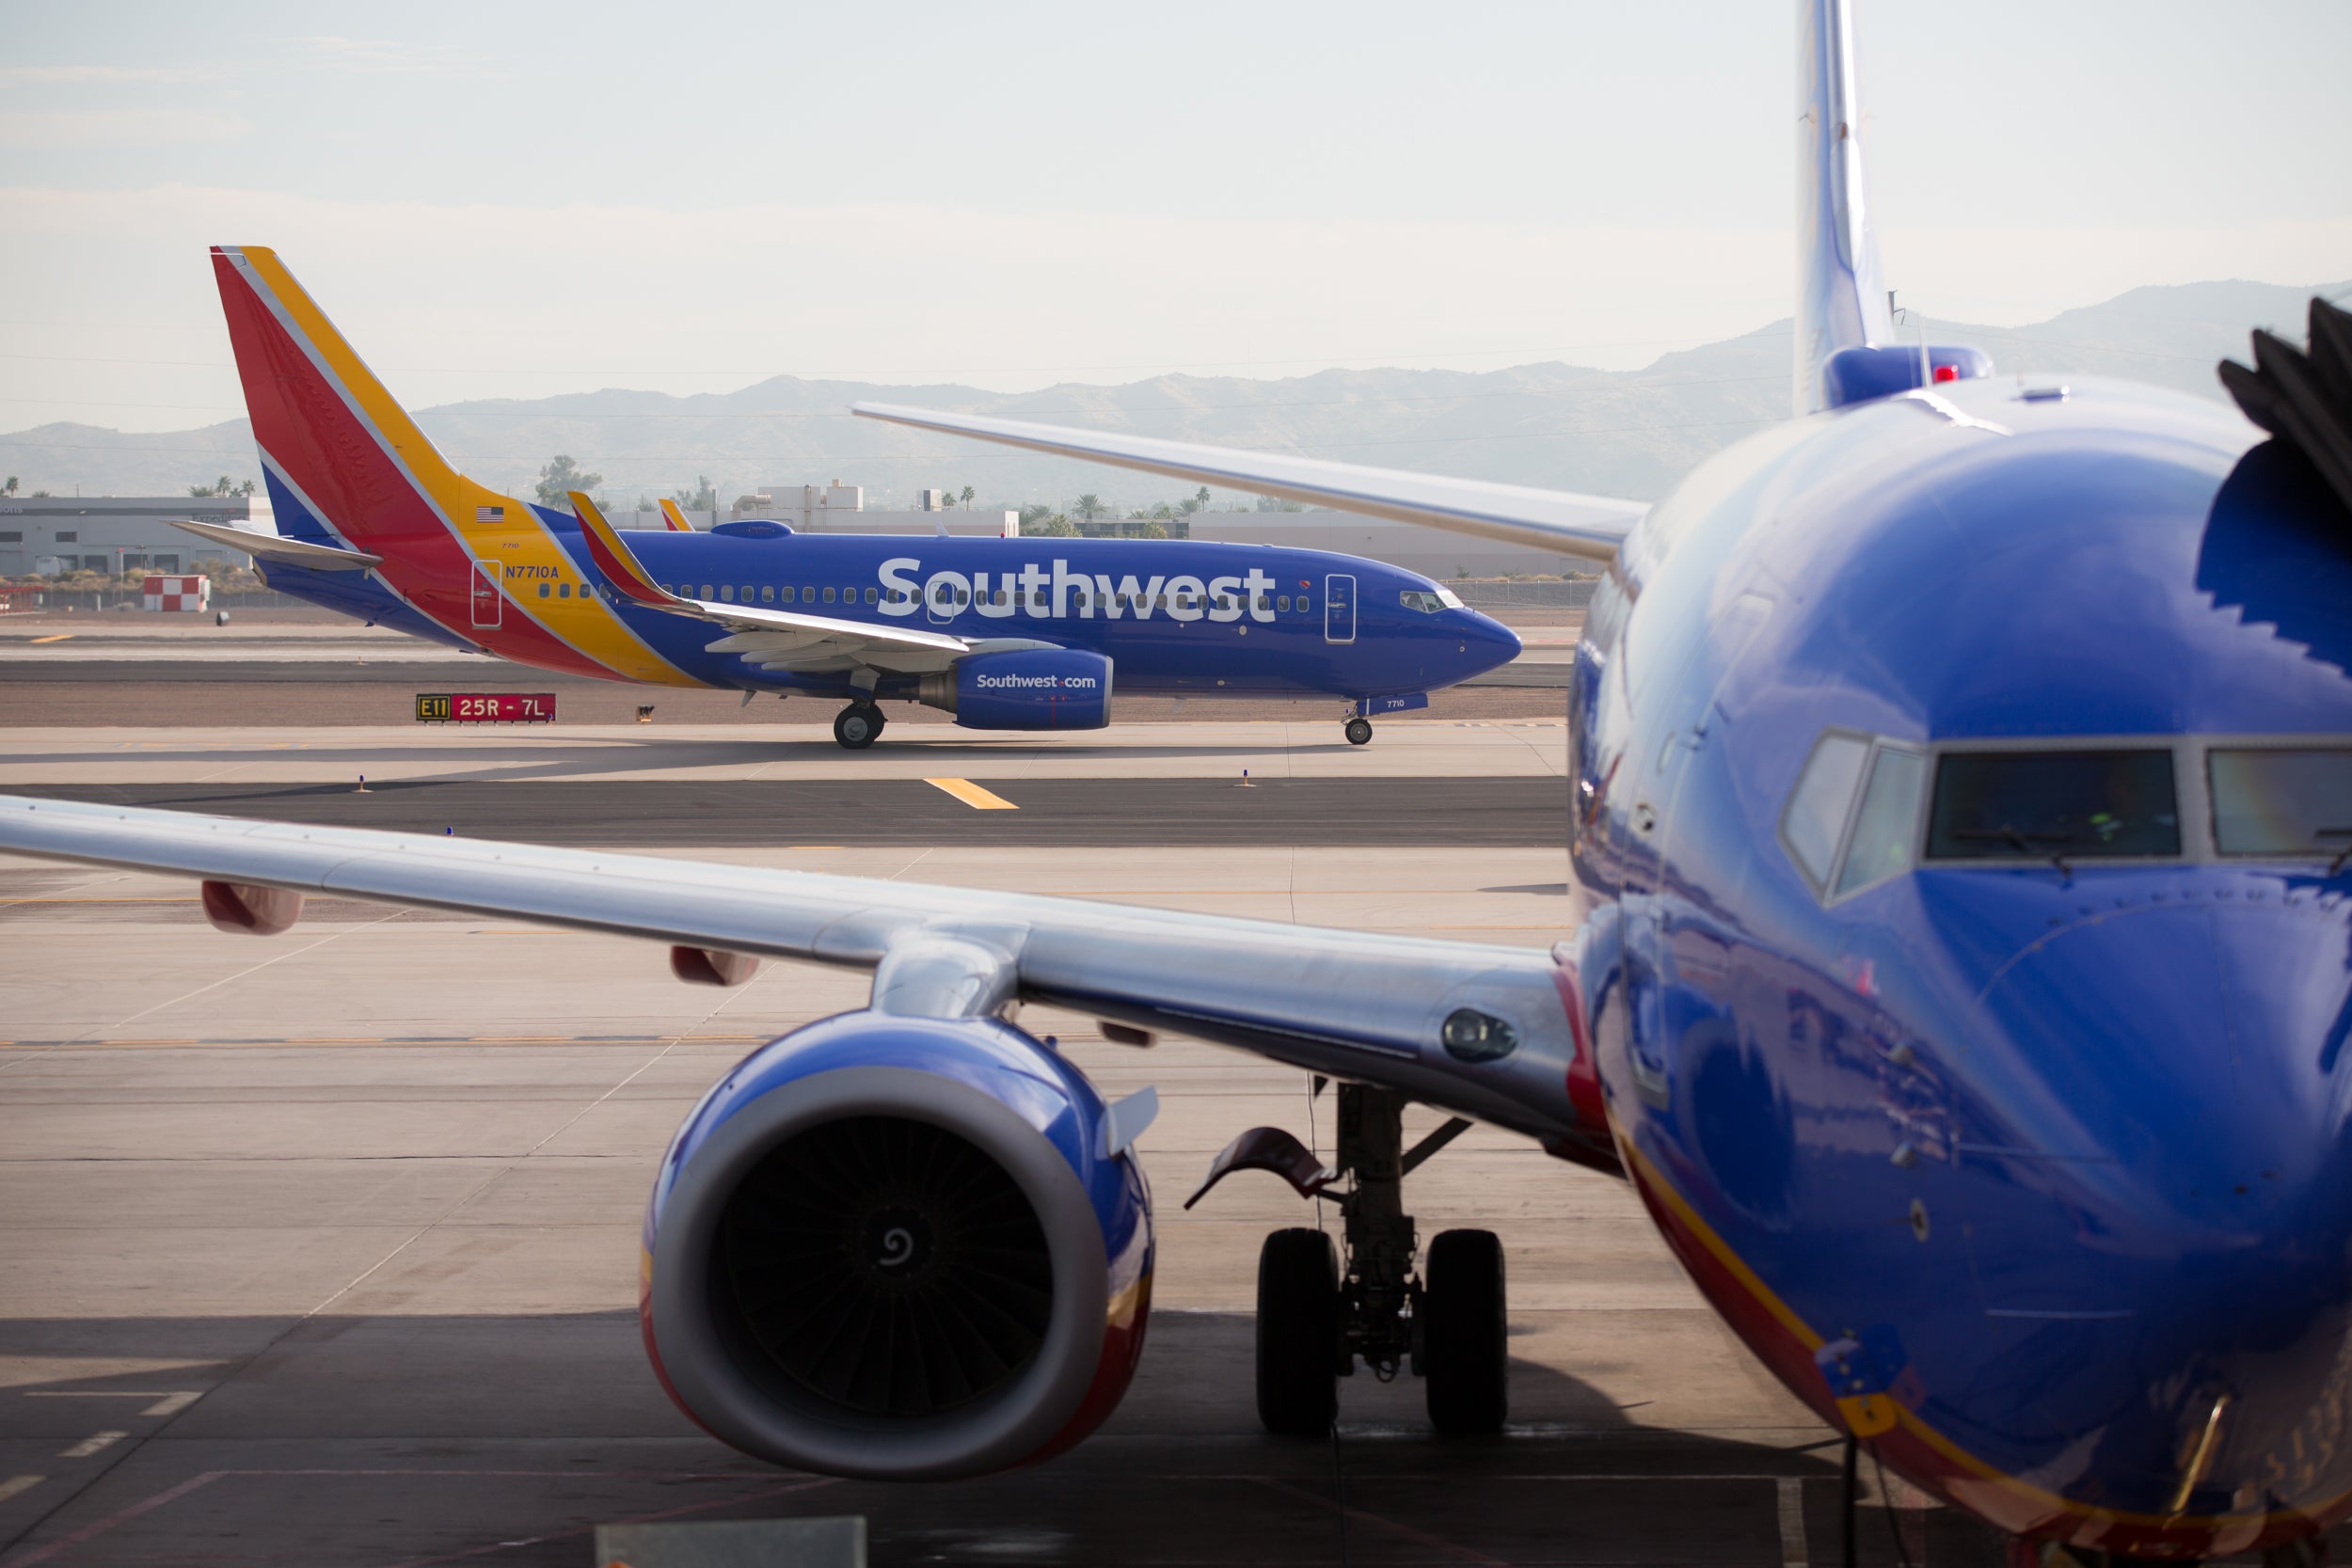 2 Southwest Airlines planes